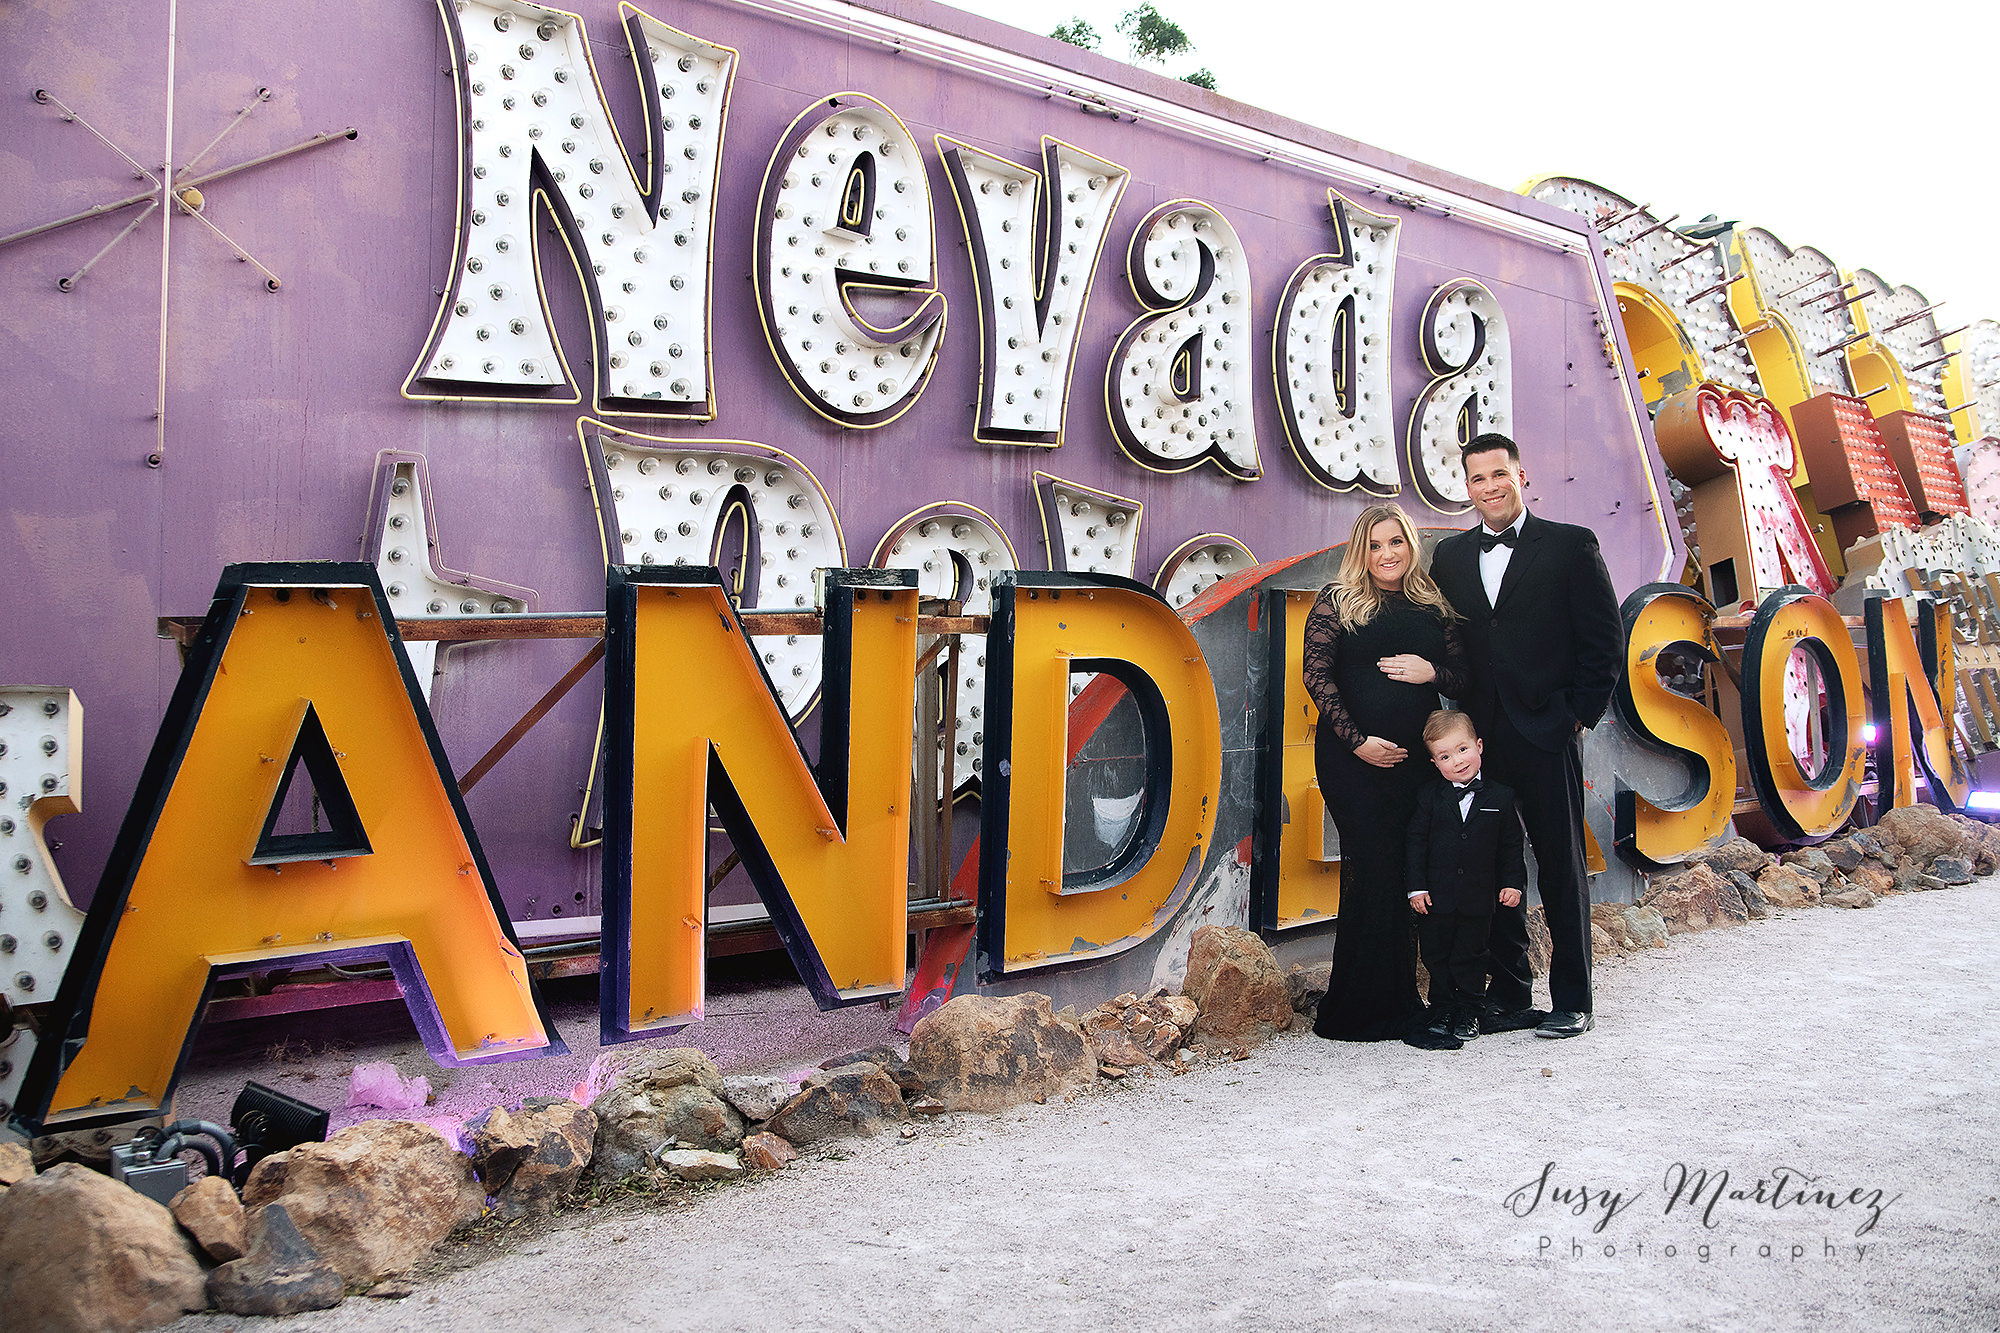 Susy Martinez Photography captures family by Anderson Nevada sign